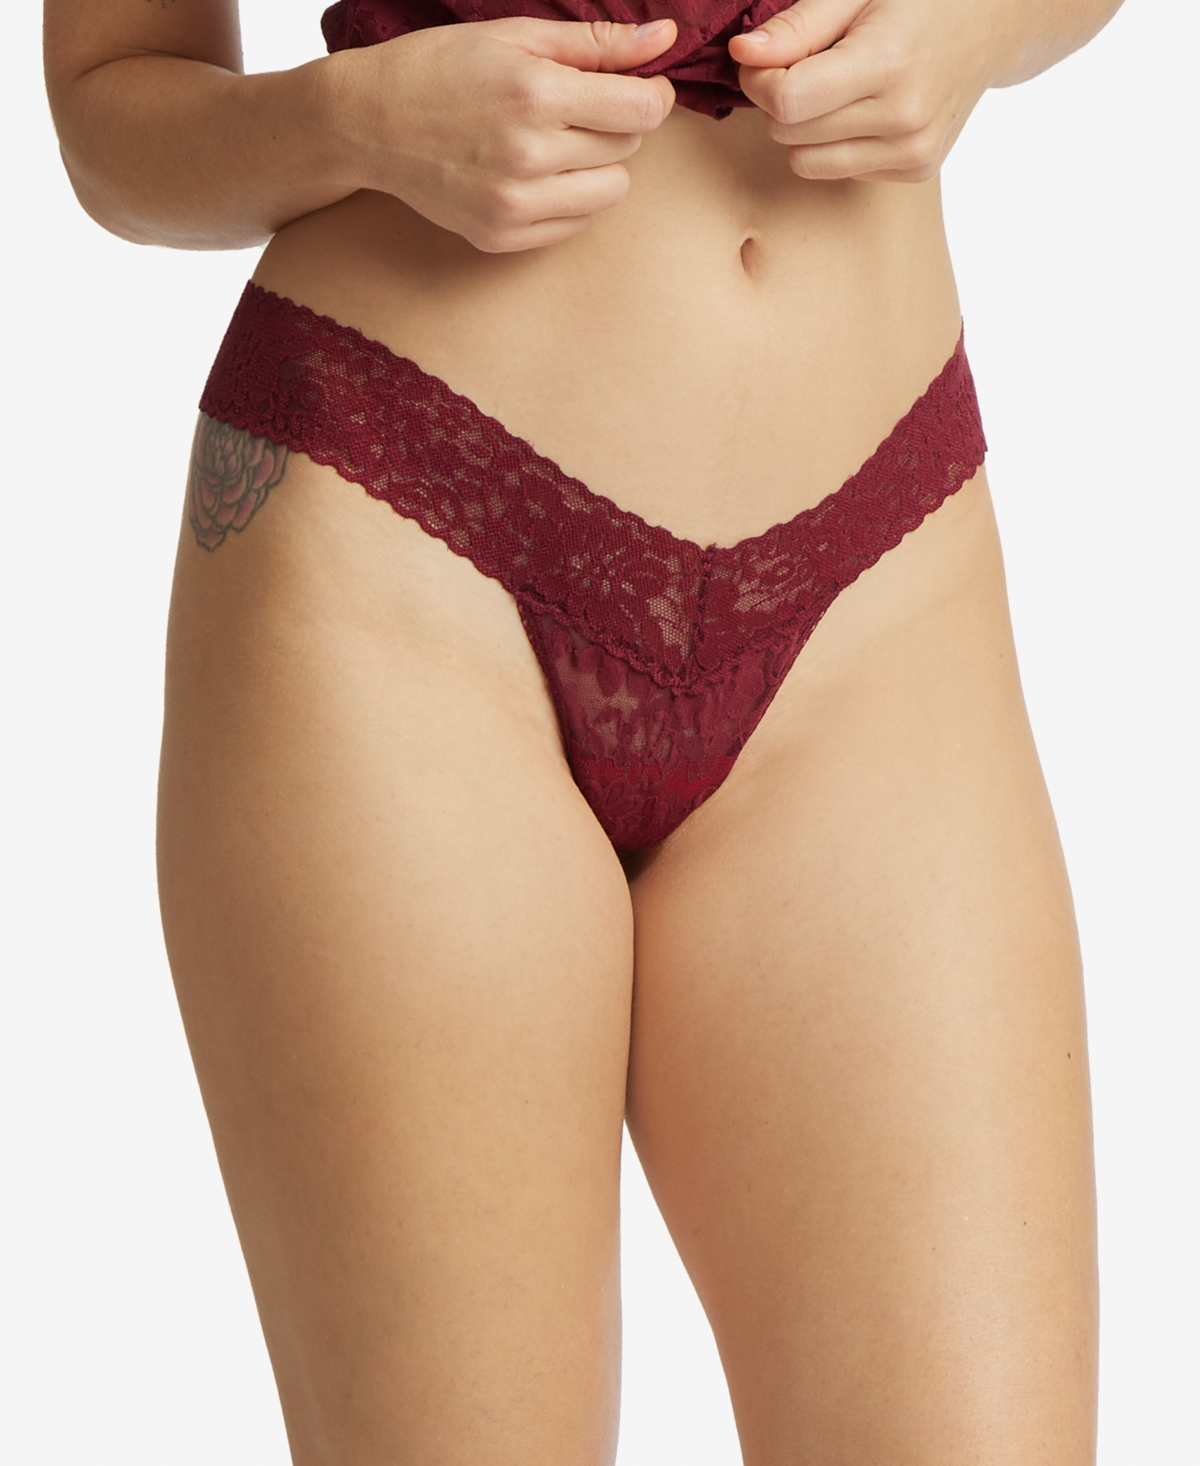 HANKY PANKY WOMEN'S DAILY LACE LOW RISE THONG 771001